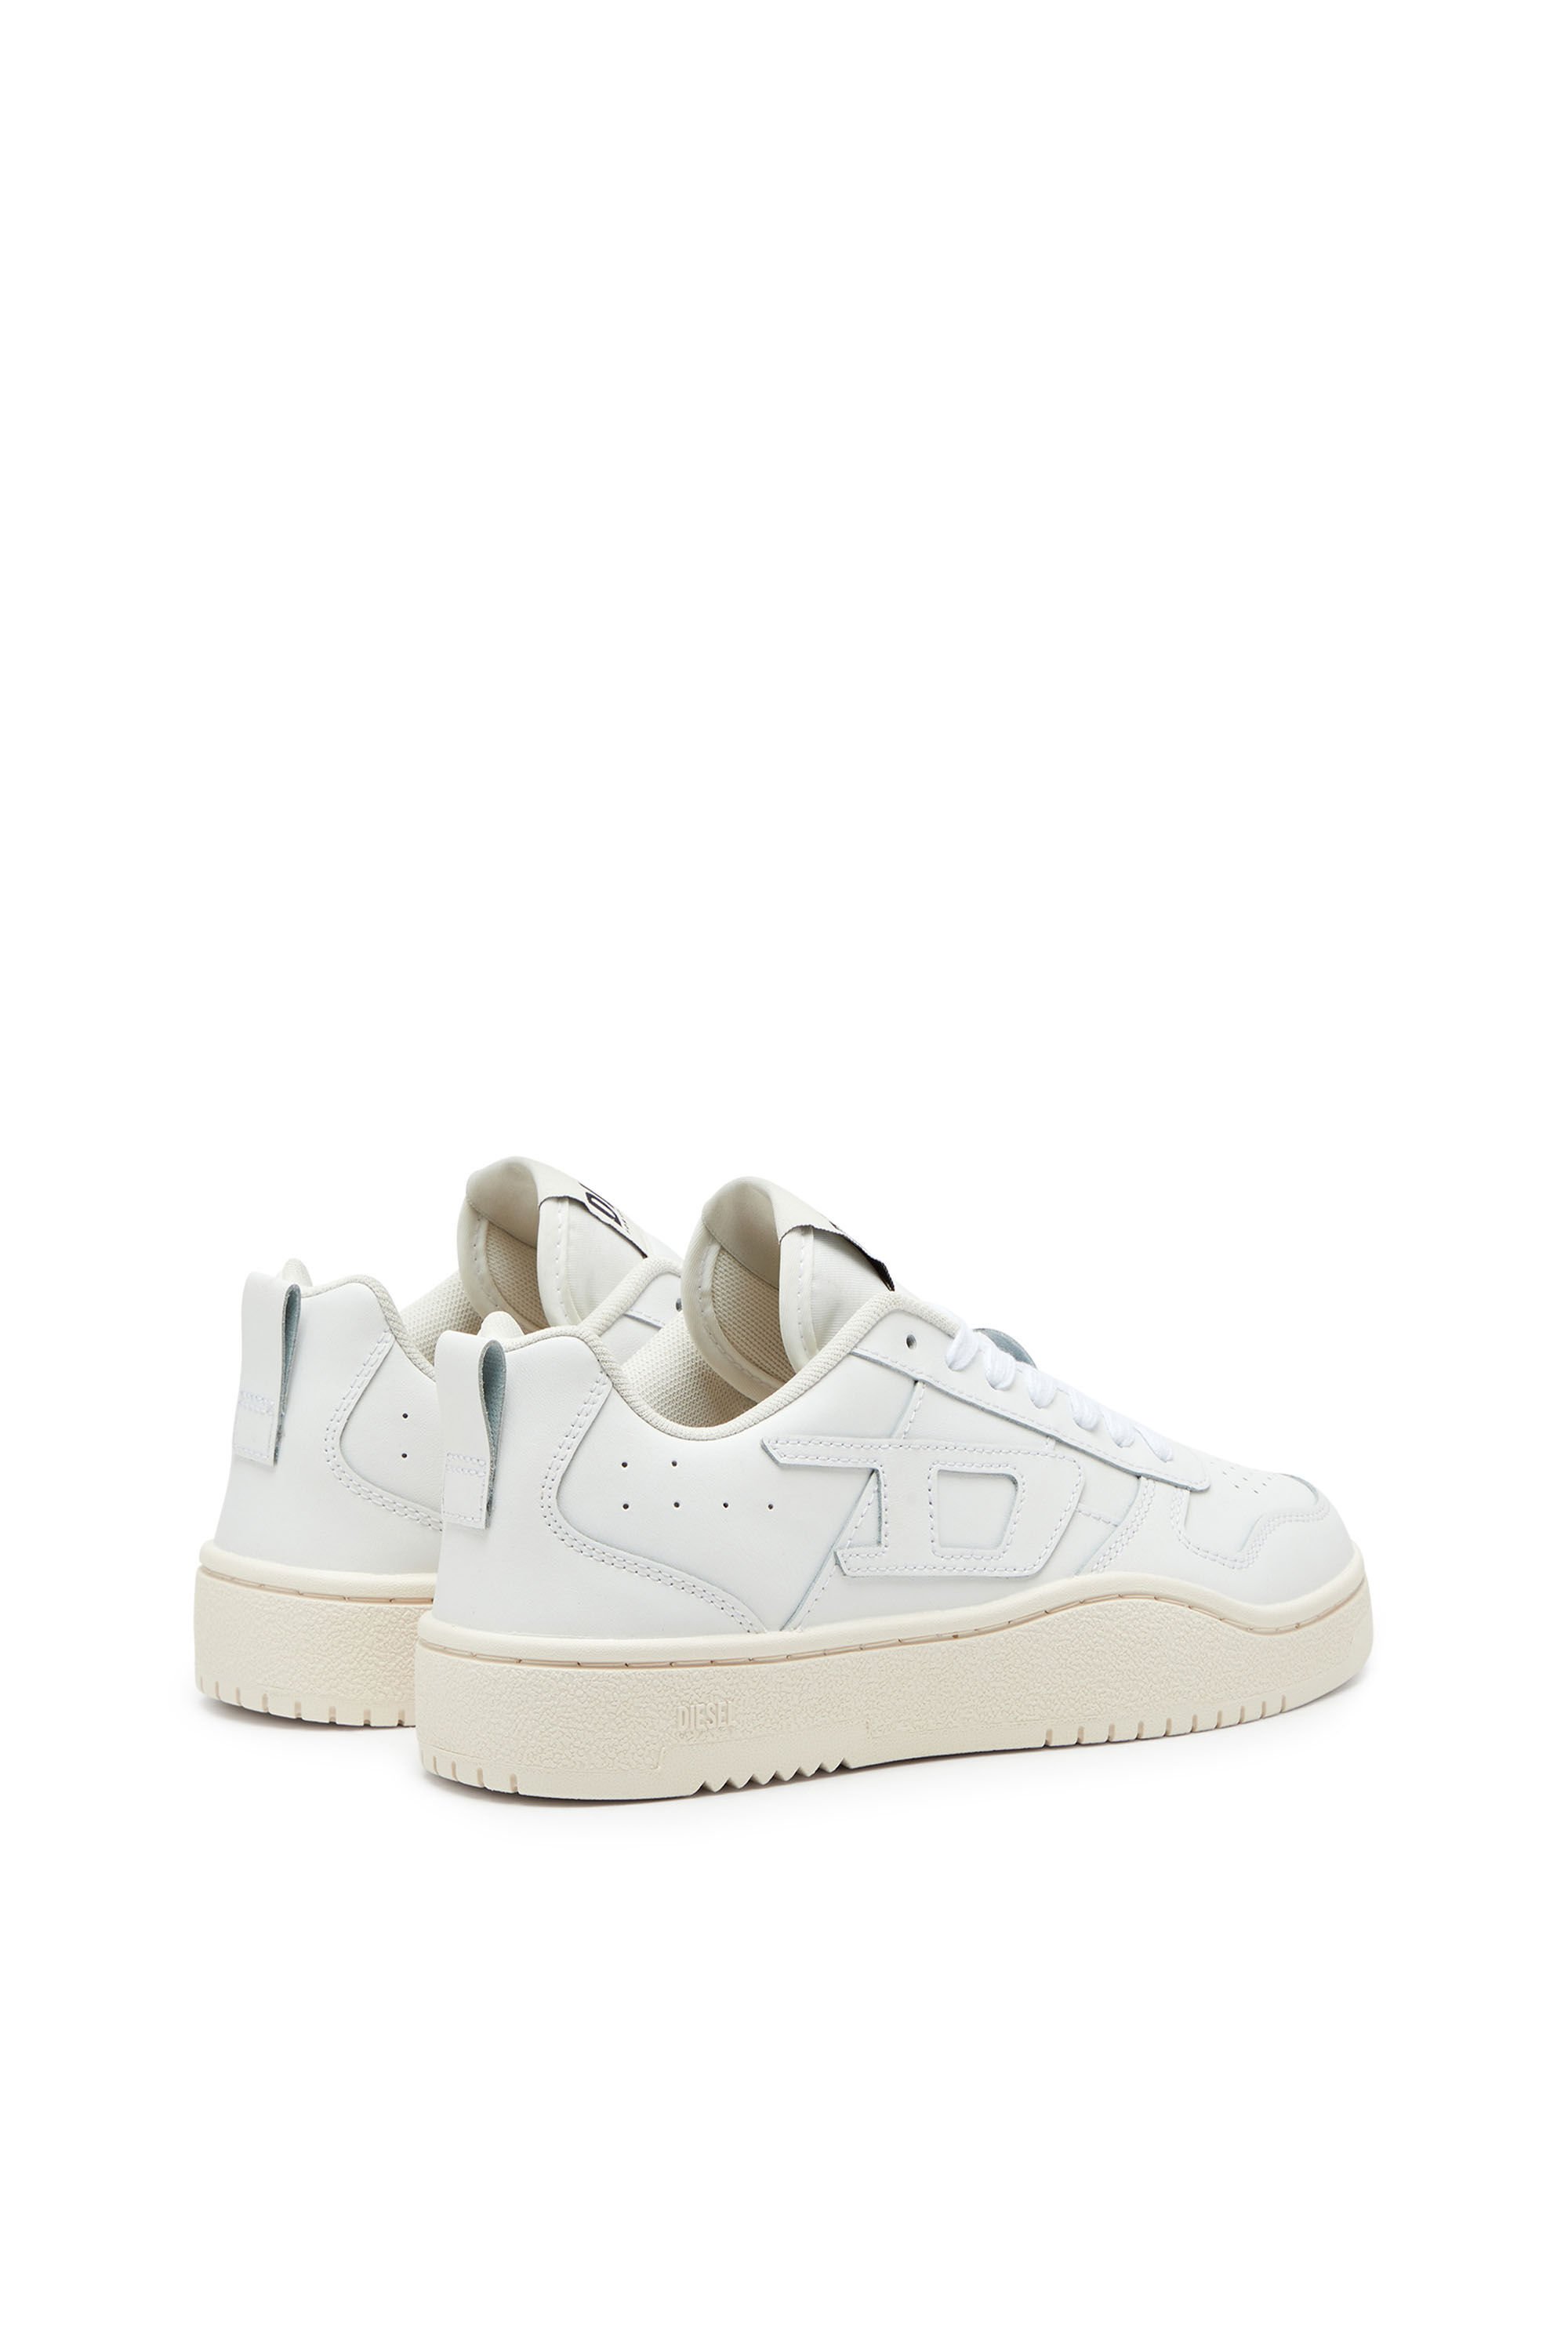 Diesel - S-UKIYO V2 LOW, Man S-Ukiyo Low-Low-top sneakers in leather and nylon in White - Image 3